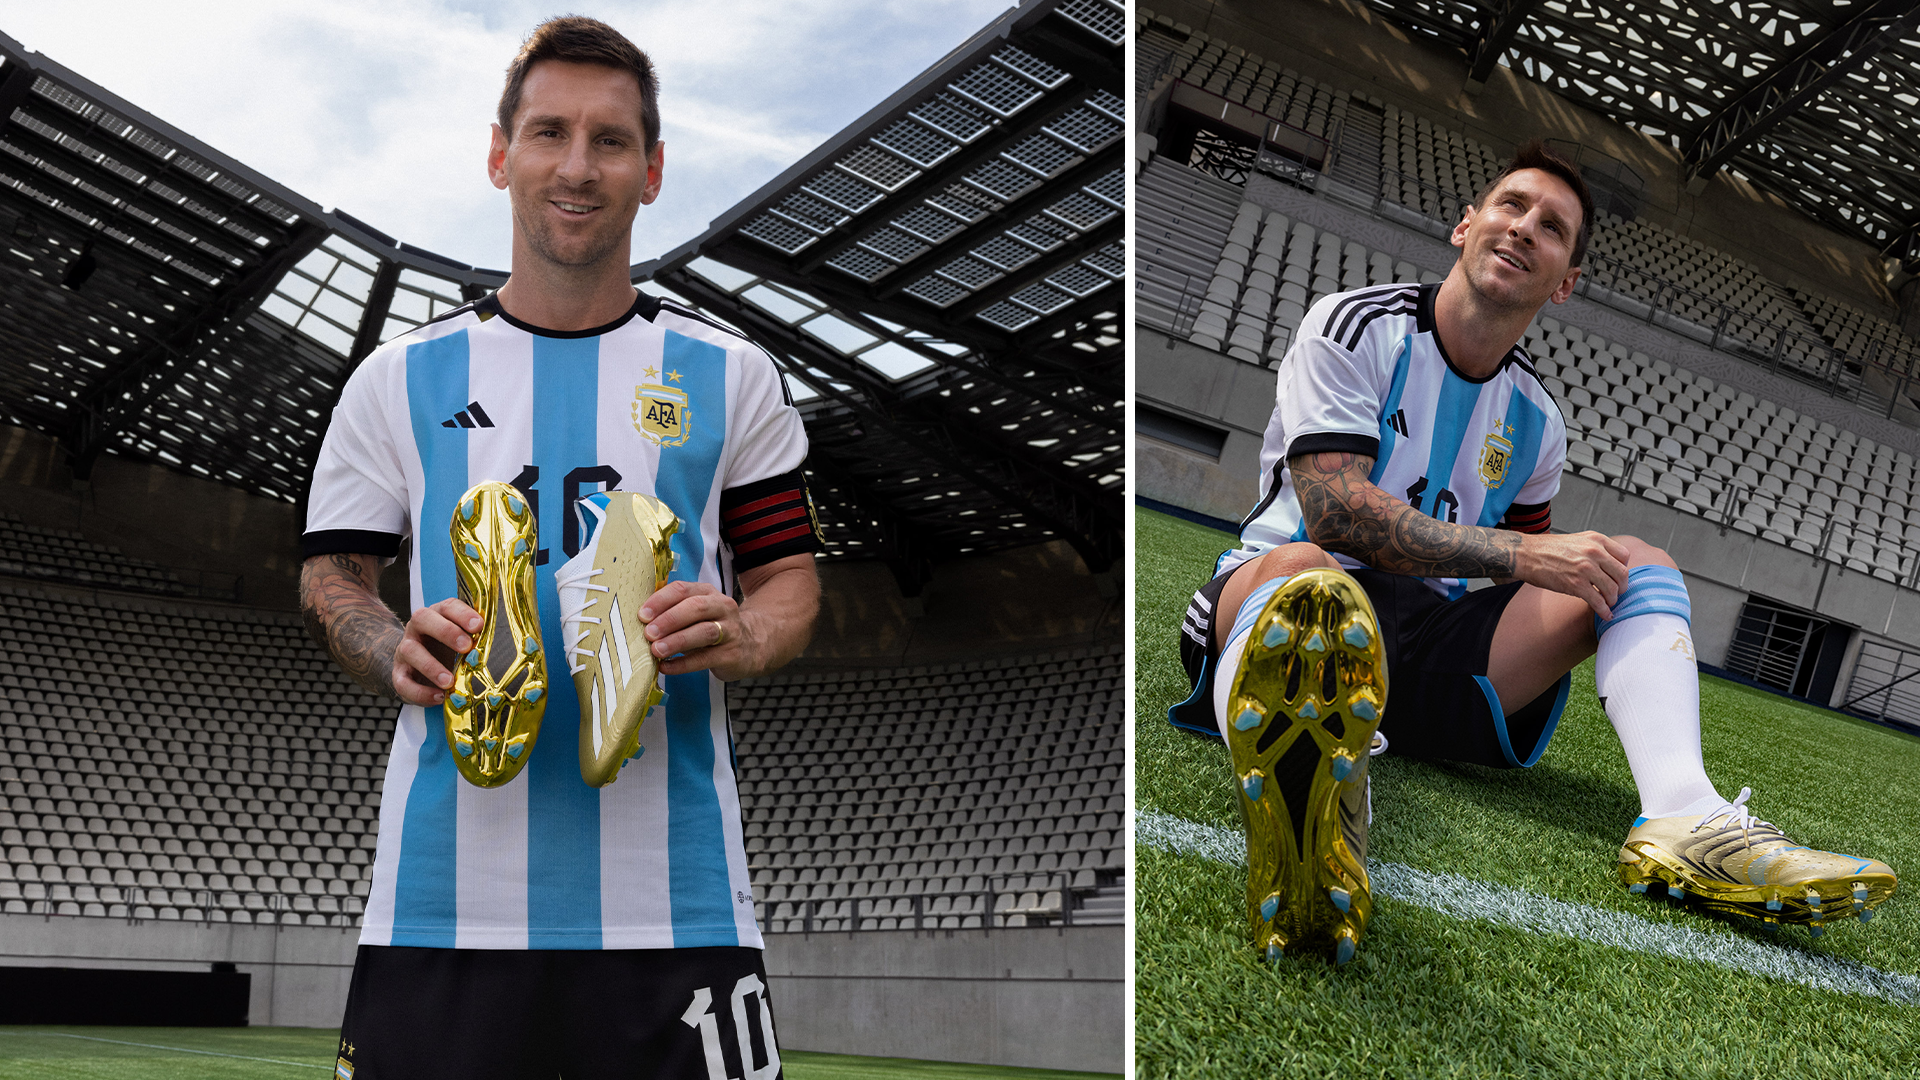 adidas release Leyenda boot pack inspired Lionel Messi's World Cup boots | Goal.com